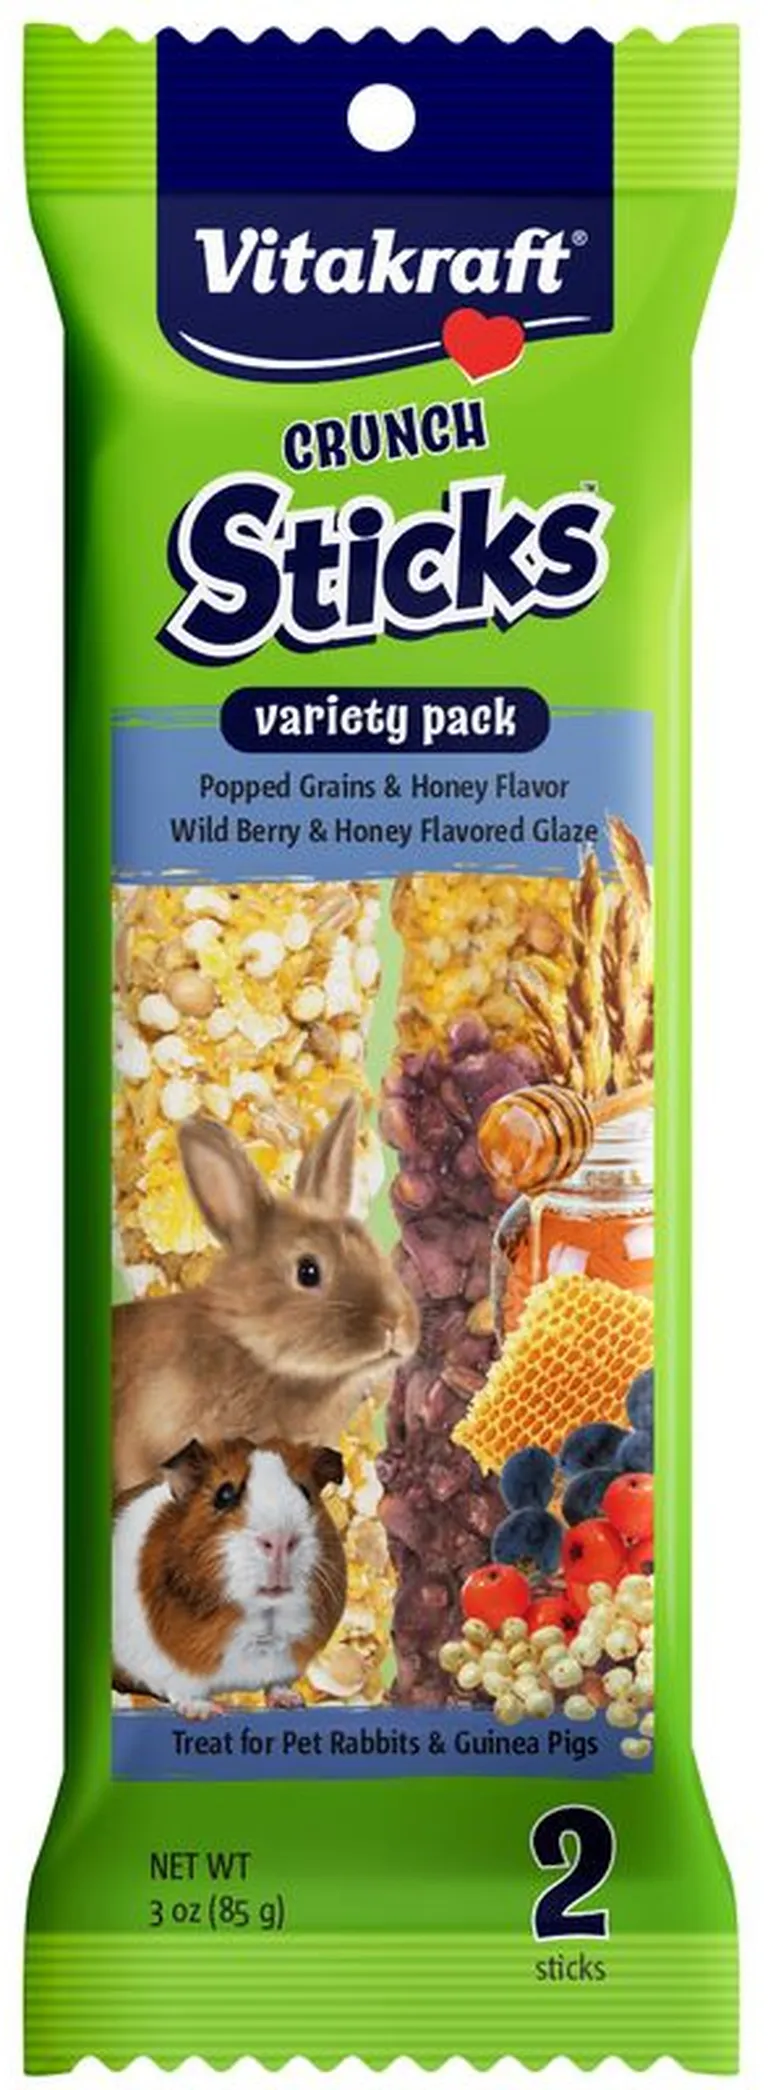 Vitakraft Crunch Sticks Variety Pack Rabbit and Guinea Pig Treats Popped Grains and Wild Berry Photo 1